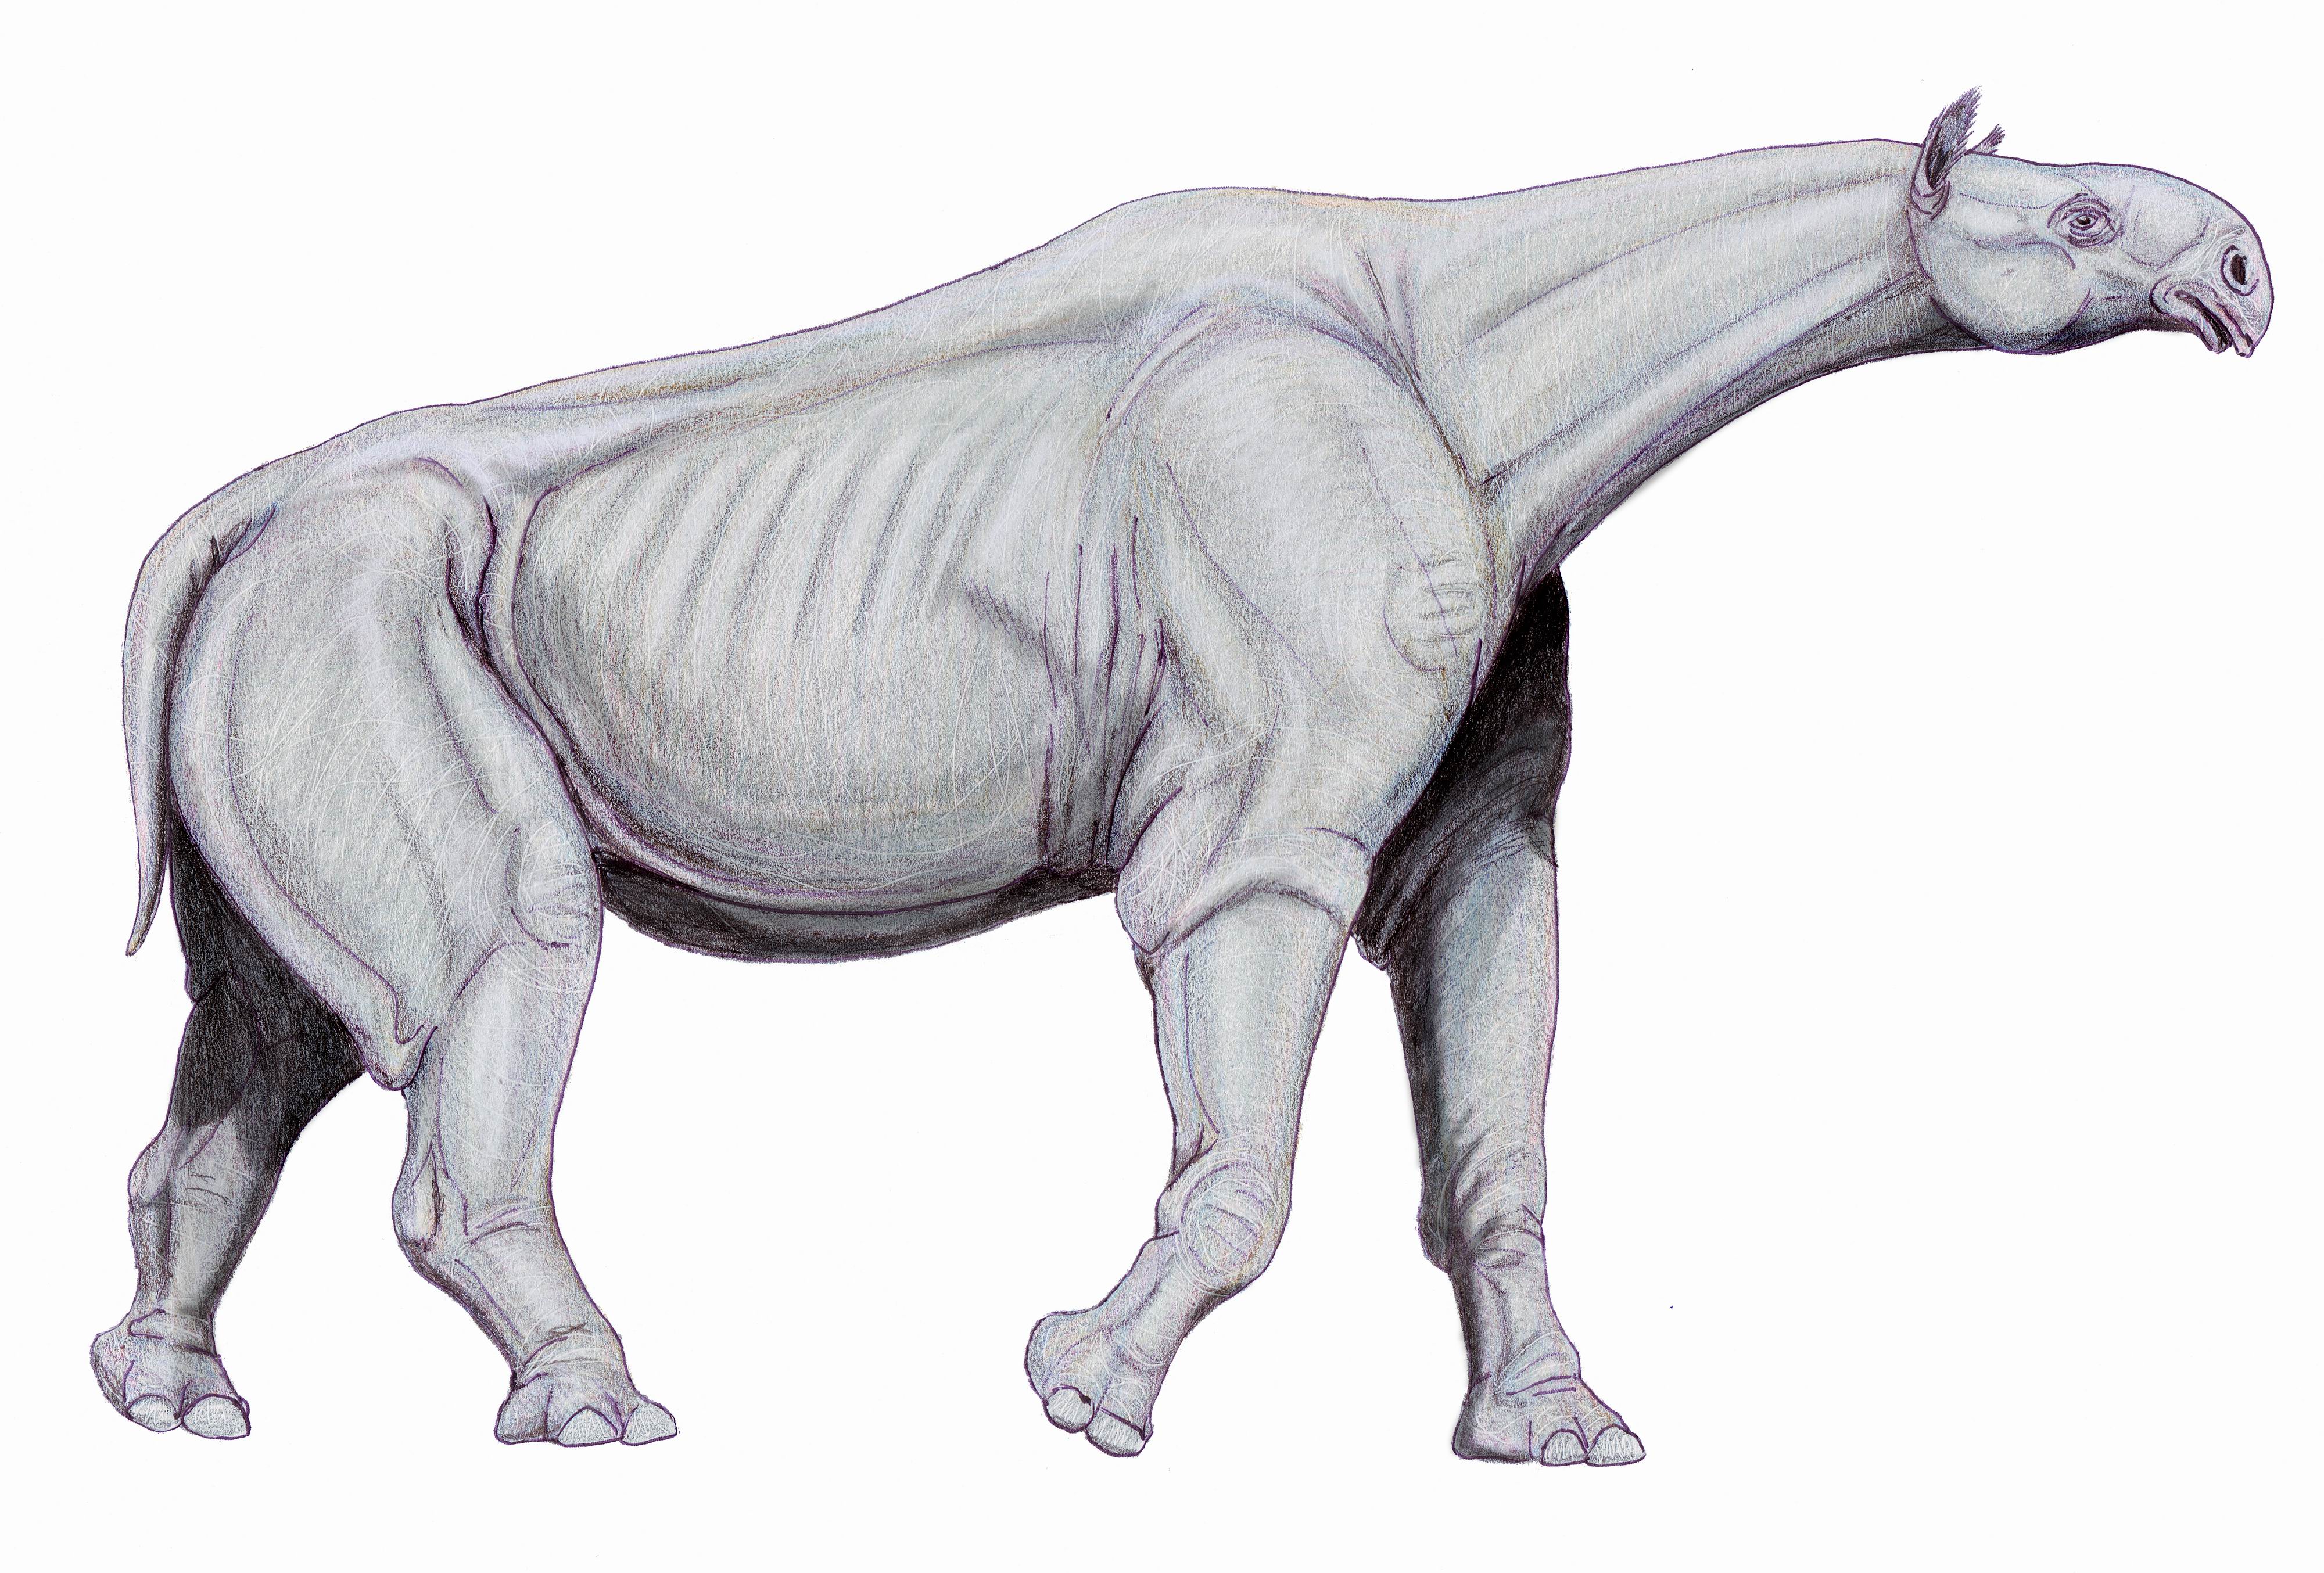 A sketch of the Indricotherium